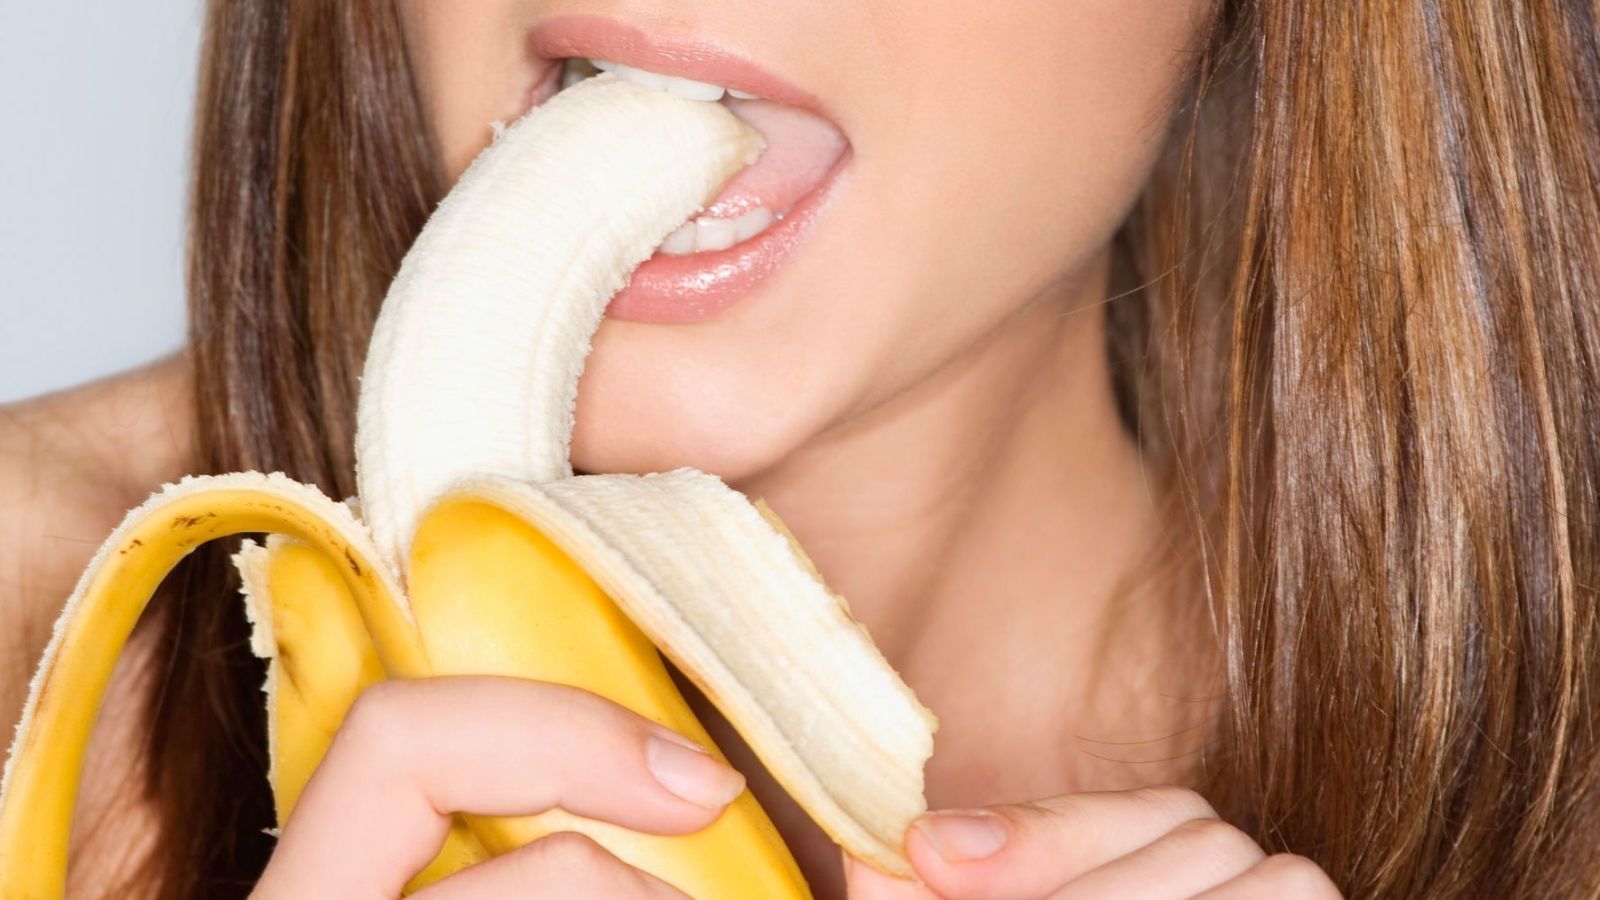 11 Things Women Wish Guys Knew About Giving Blow Jobs